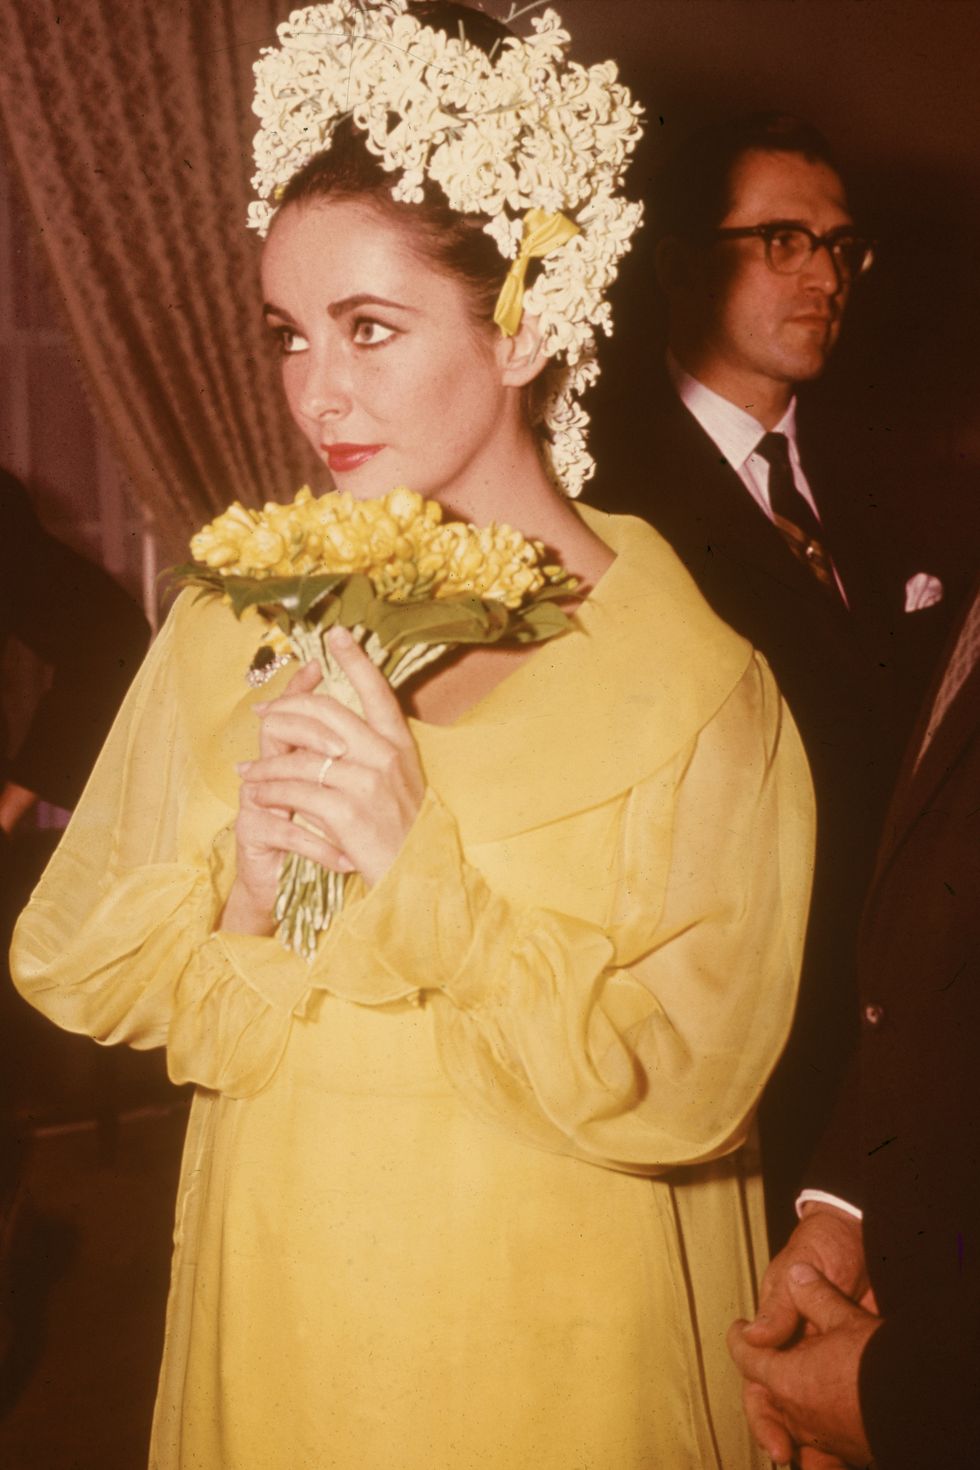 british born actor elizabeth taylor, a yellow dress and floral headdress, holds a bouquet of flowers at her wedding to actor richard burton, march 15, 1964 photo by hulton archivegetty images